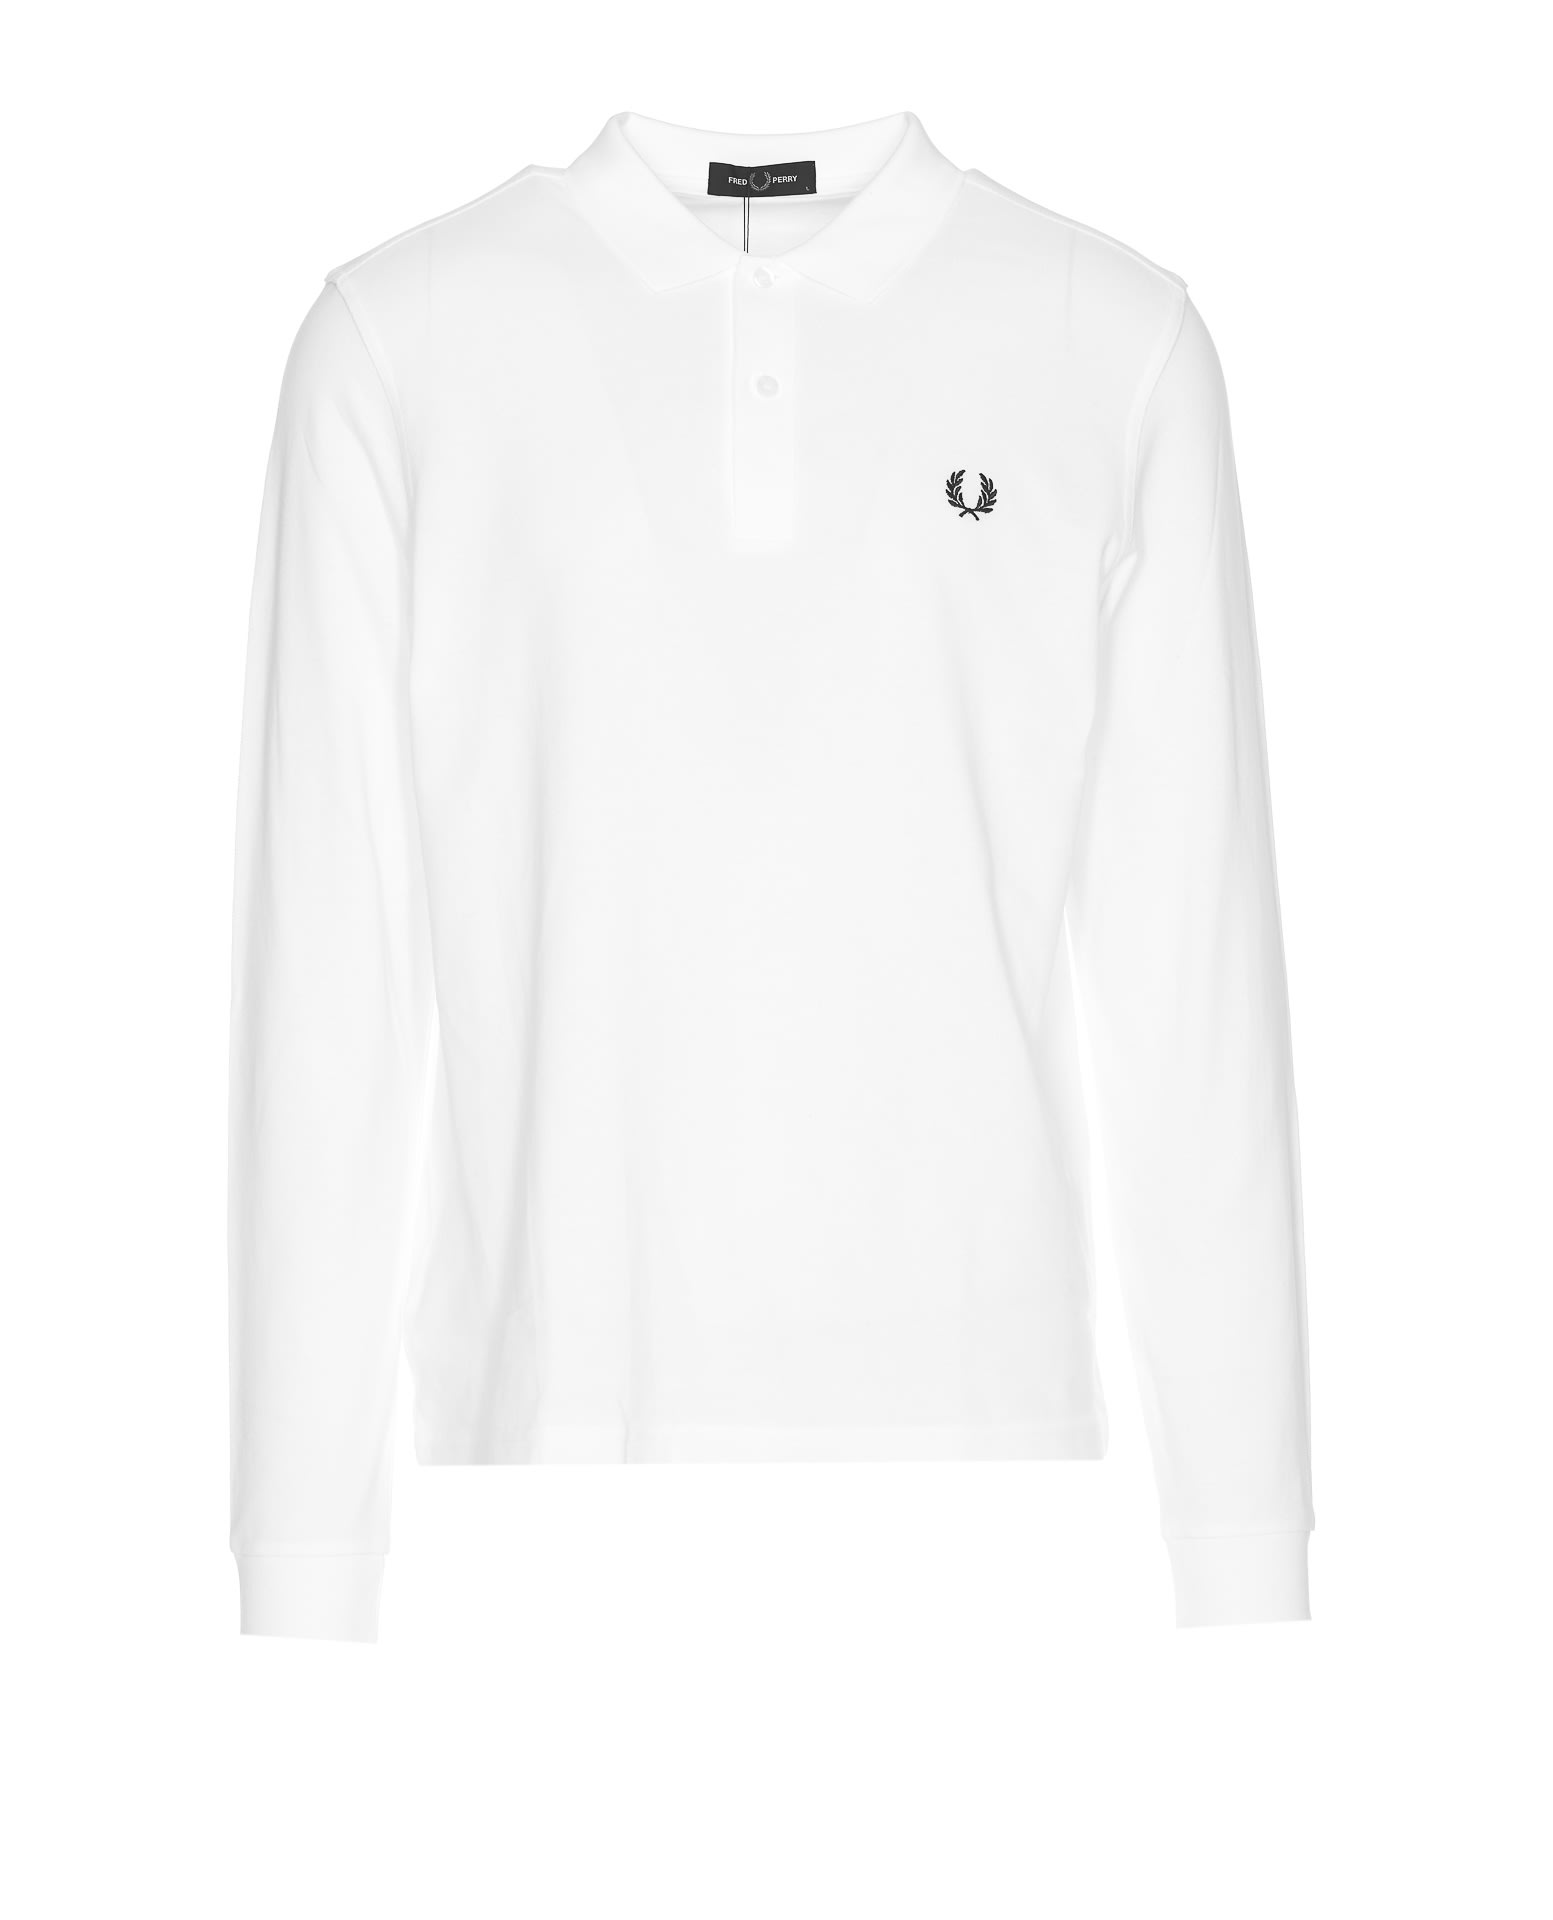 Fred Perry Polo T-shirt